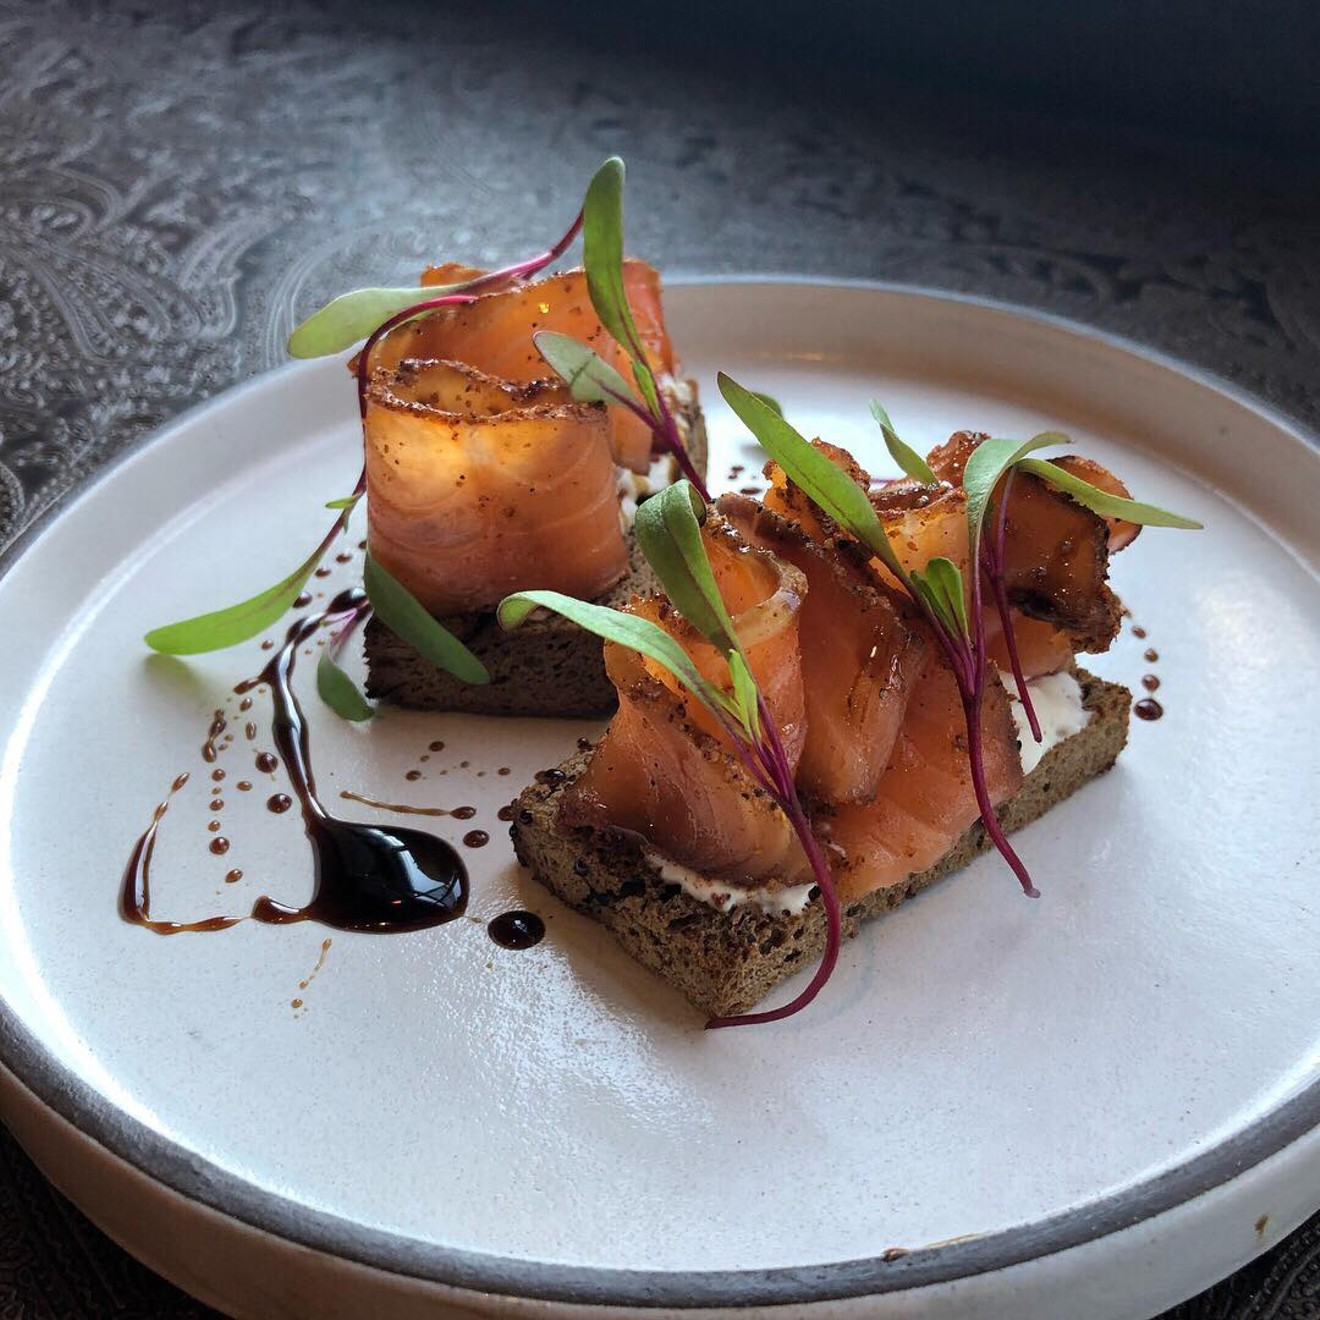 At Vesta, chef Nicholas Kayser's salmon pastrami dish is as pretty as it is delicious.